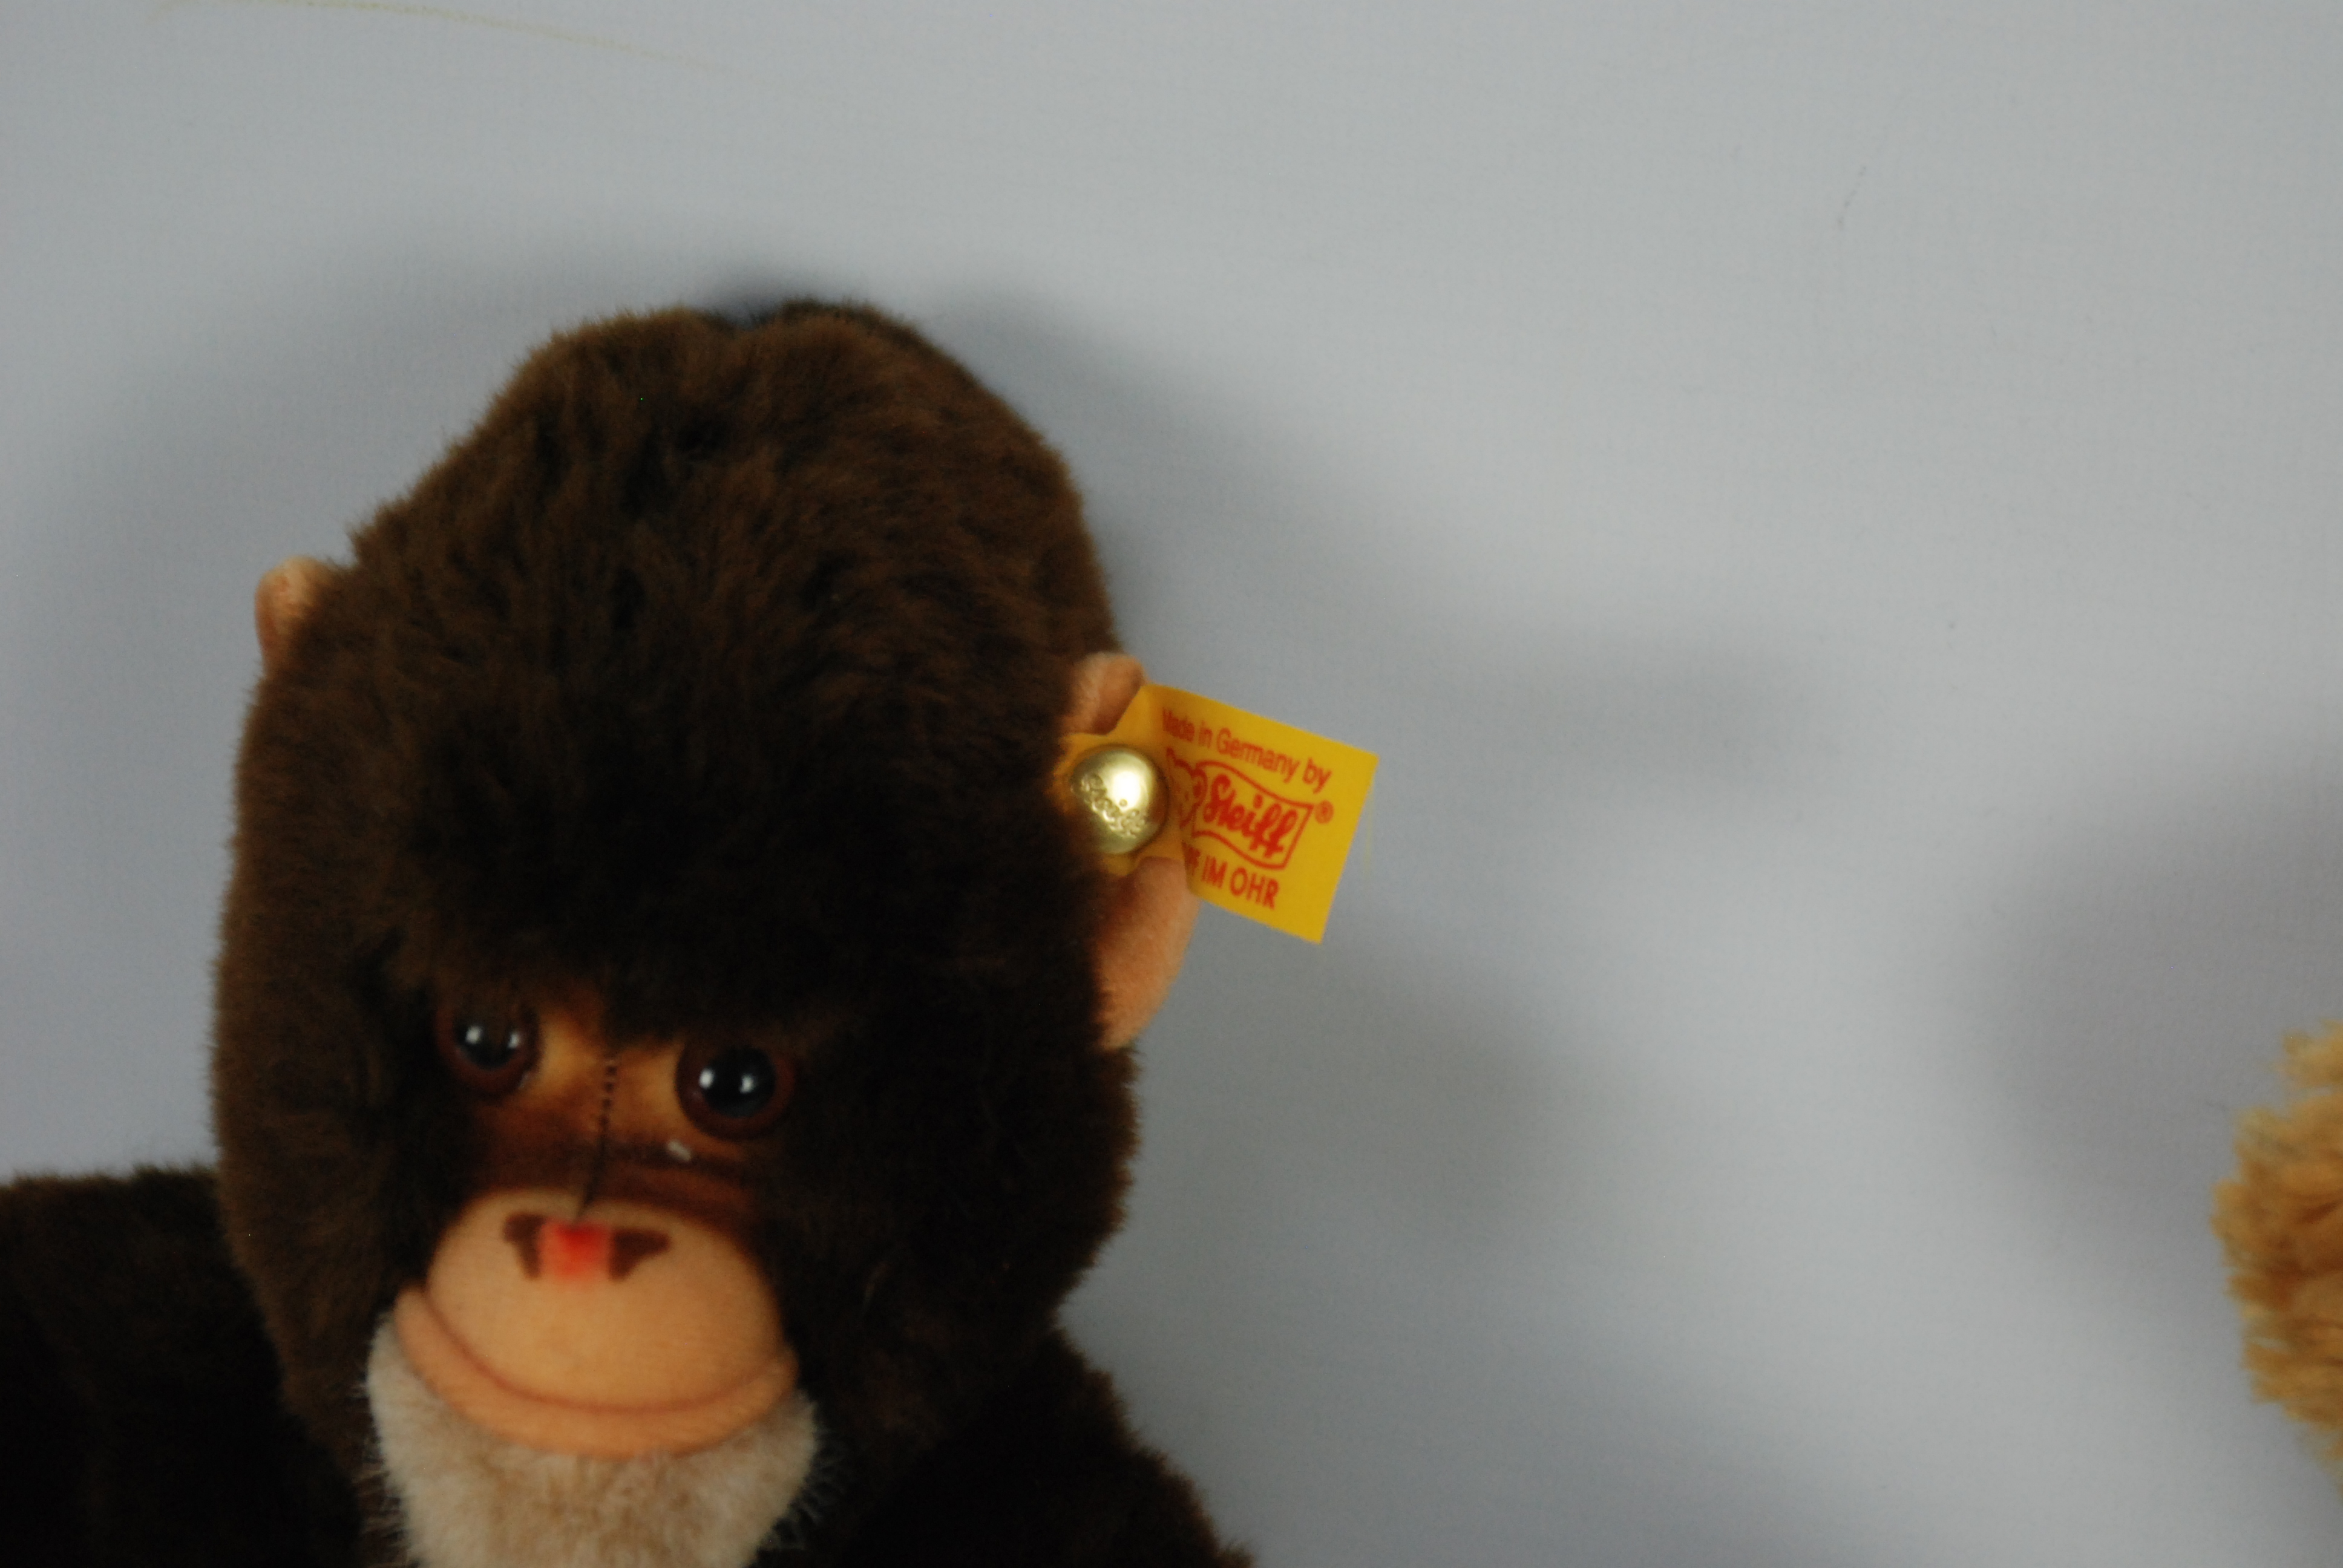 Steiff - Two Steiff bears - Lot includes a 'Jocko' monkey with yellow tag on its ear. - Image 6 of 6